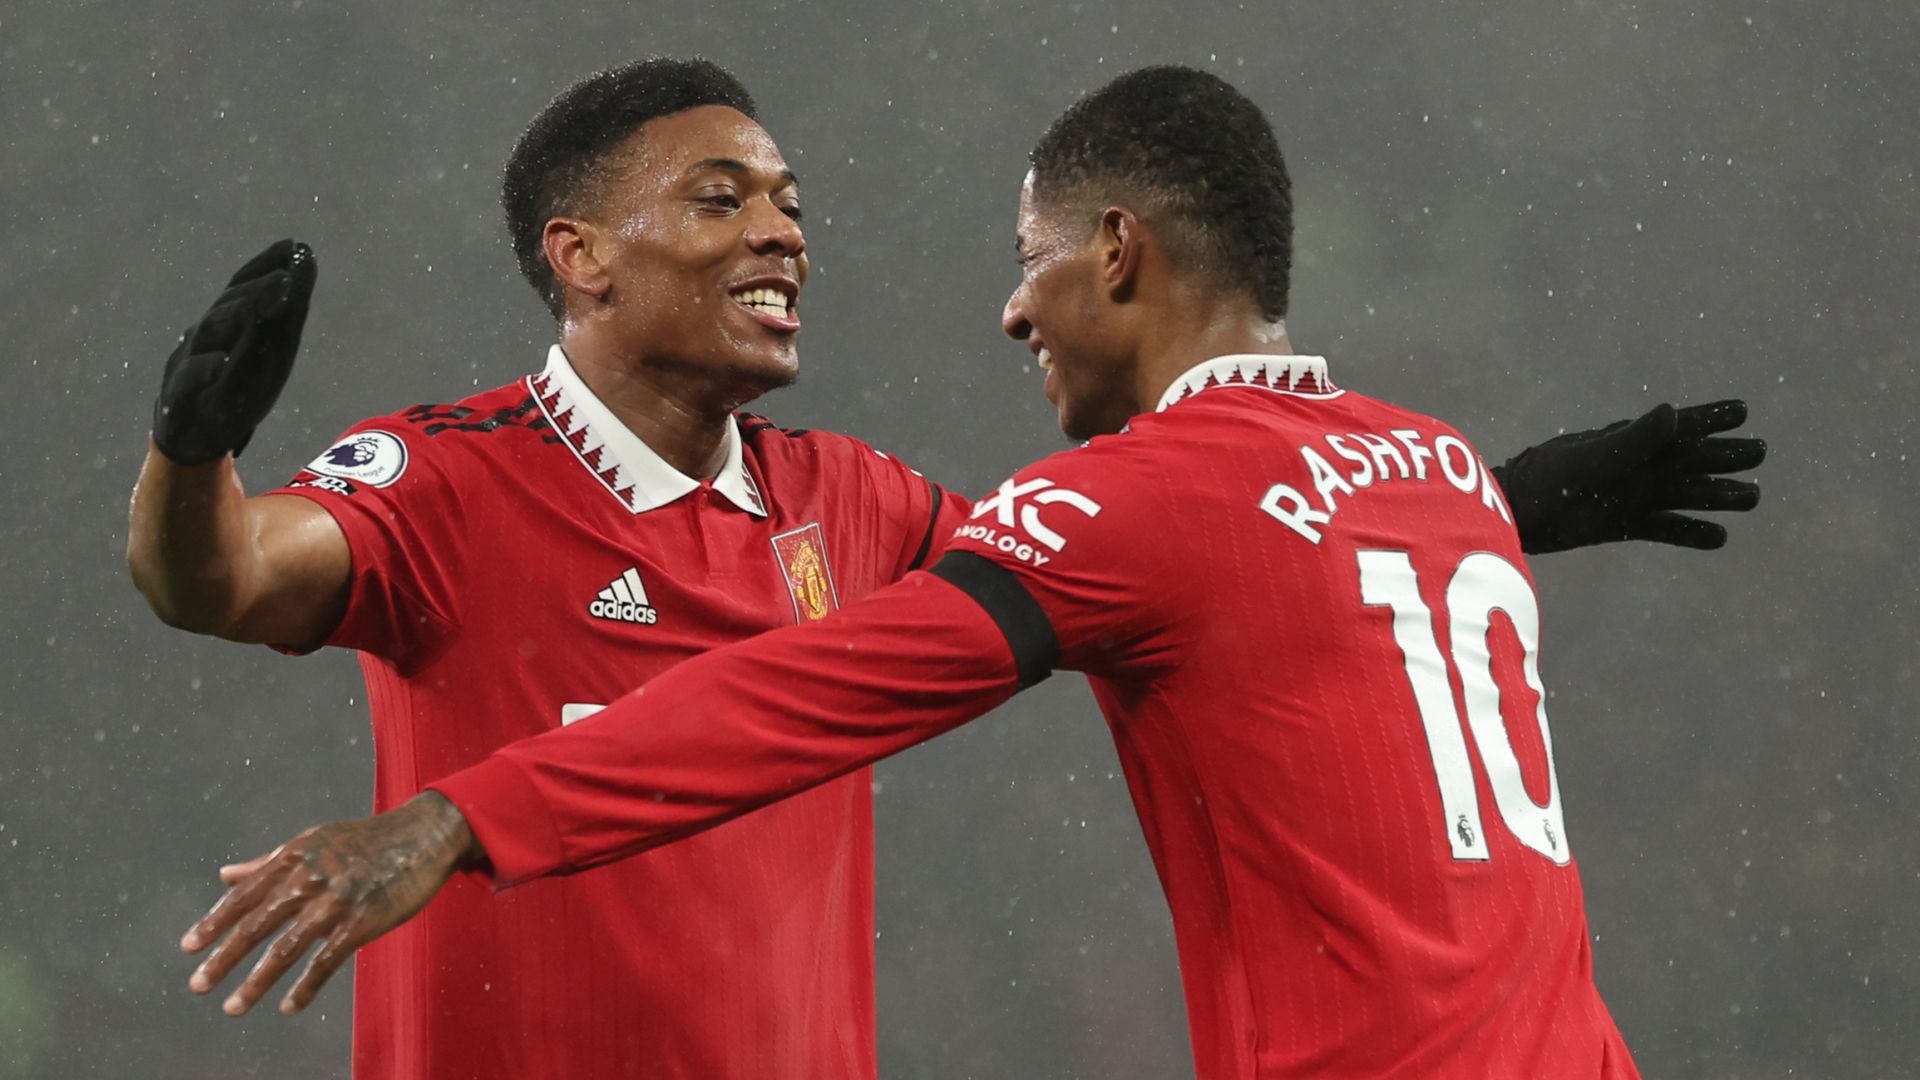 Man Utd 3-0 Nottingham Forest: Marcus Rashford scores one goal and sets up another in easy win